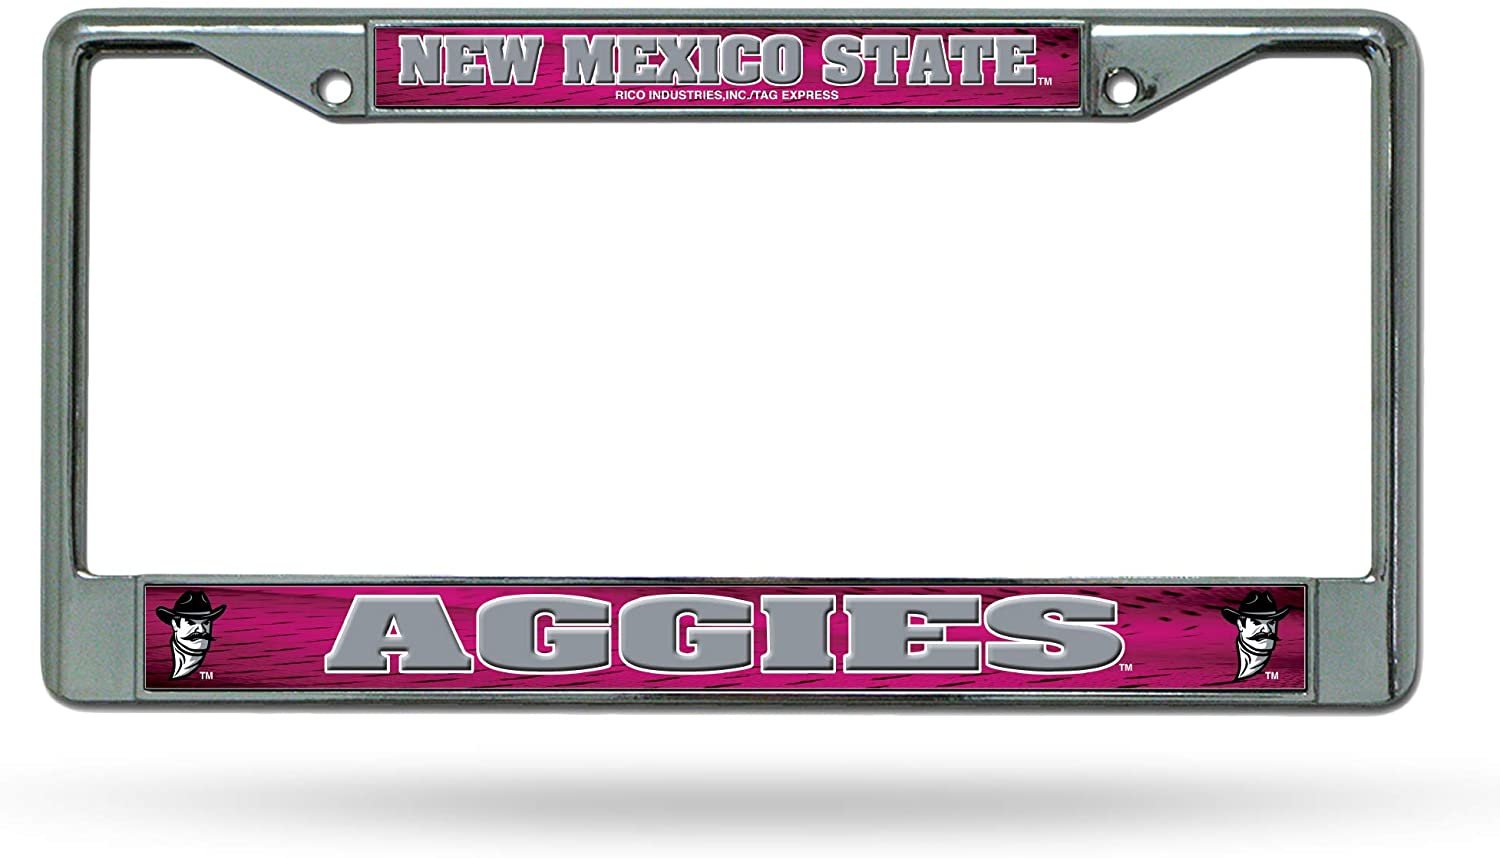 New Mexico State University Aggies Premium Metal License Plate Frame Chrome Tag Cover, 12x6 Inch